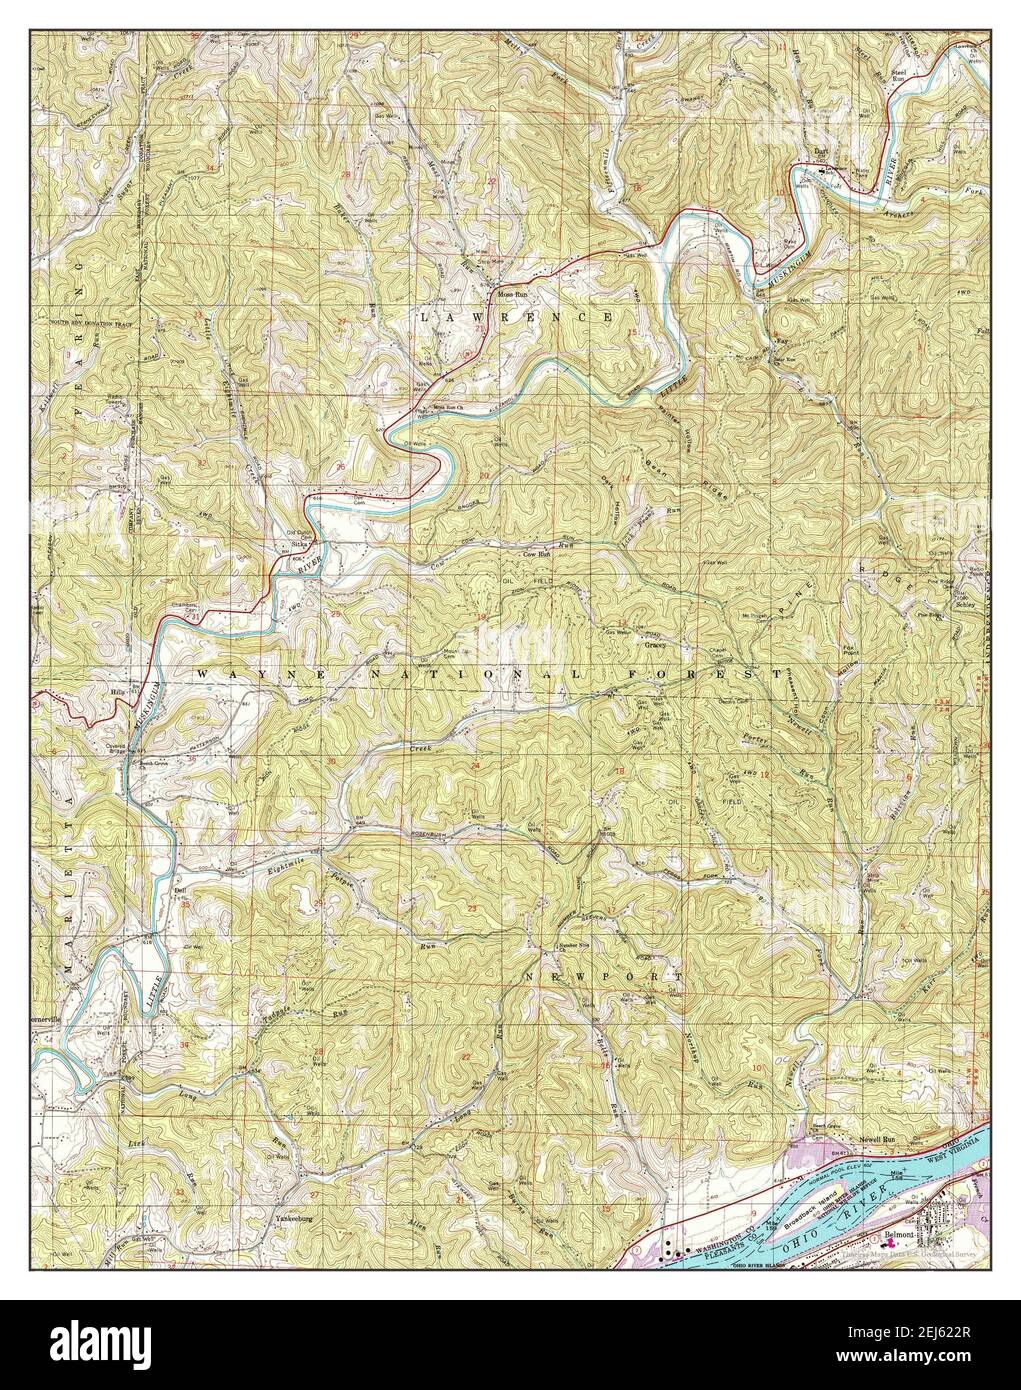 Belmont, West Virginia, map 1994, 1:24000, United States of America by Timeless Maps, data U.S. Geological Survey Stock Photo